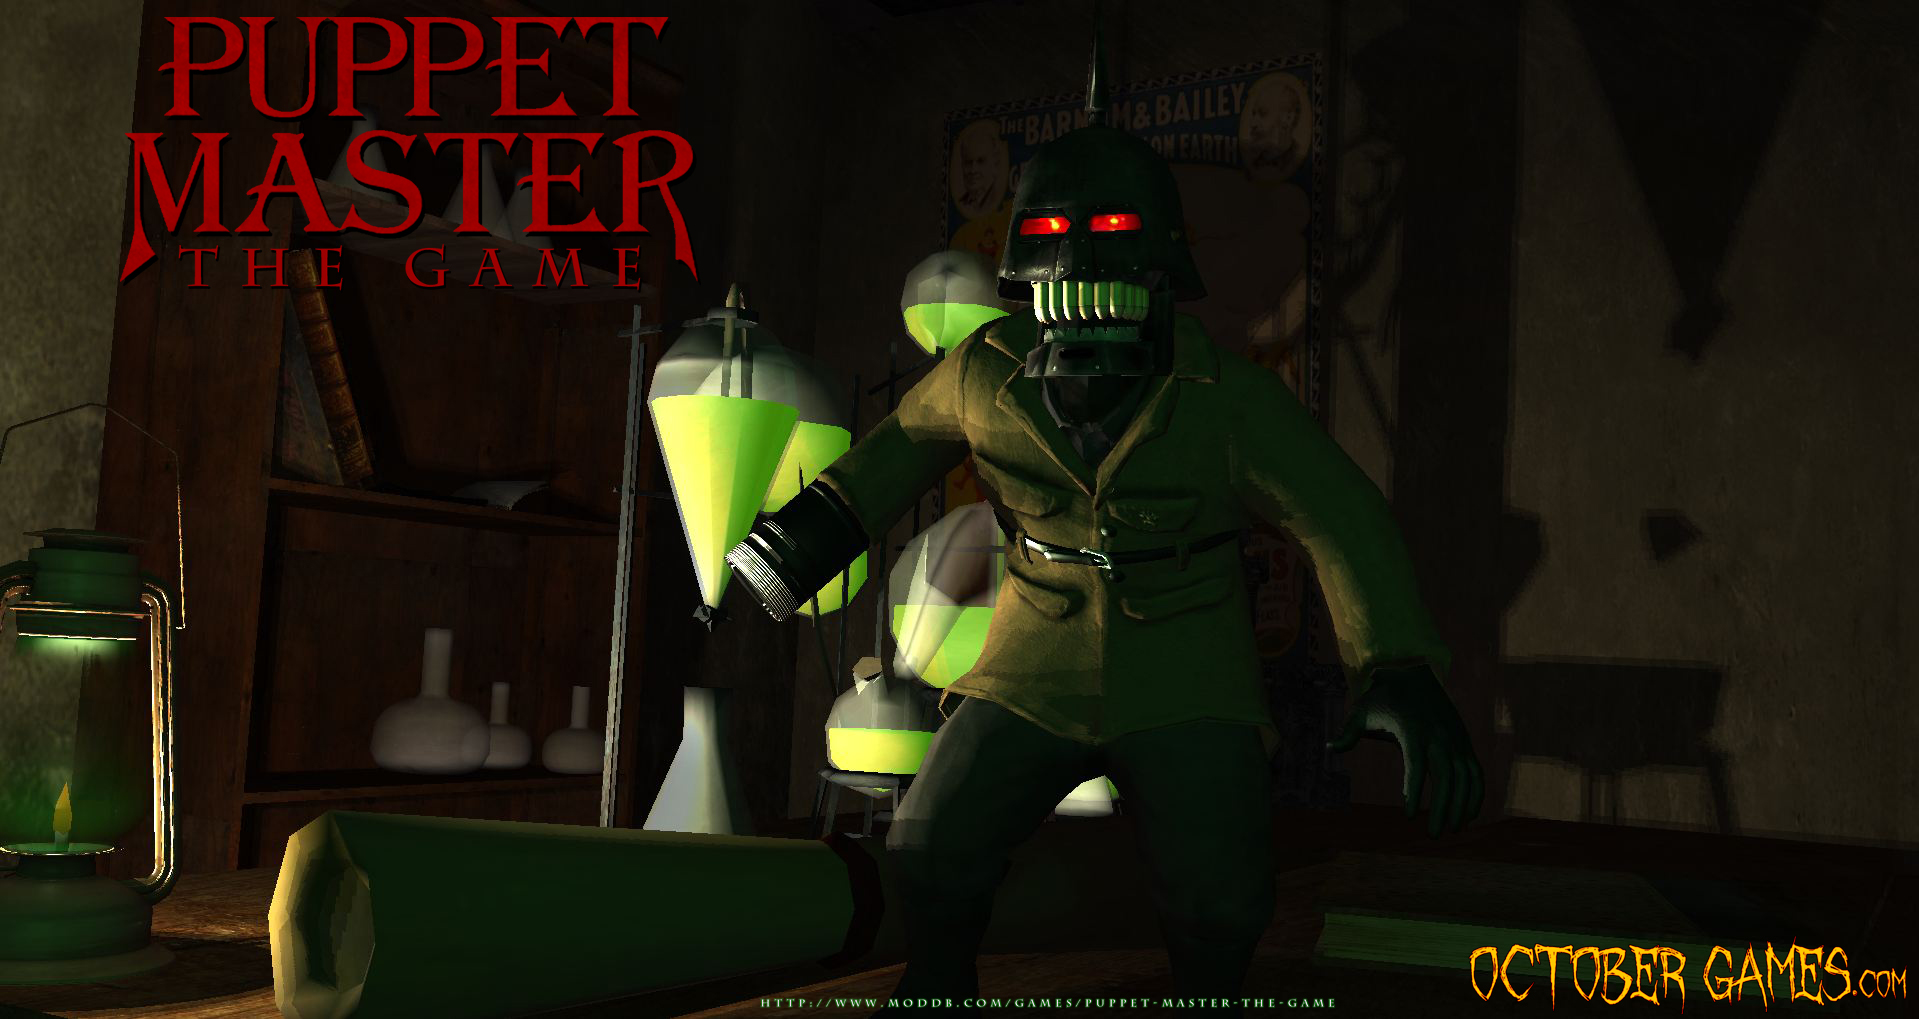 Puppetmaster adventures